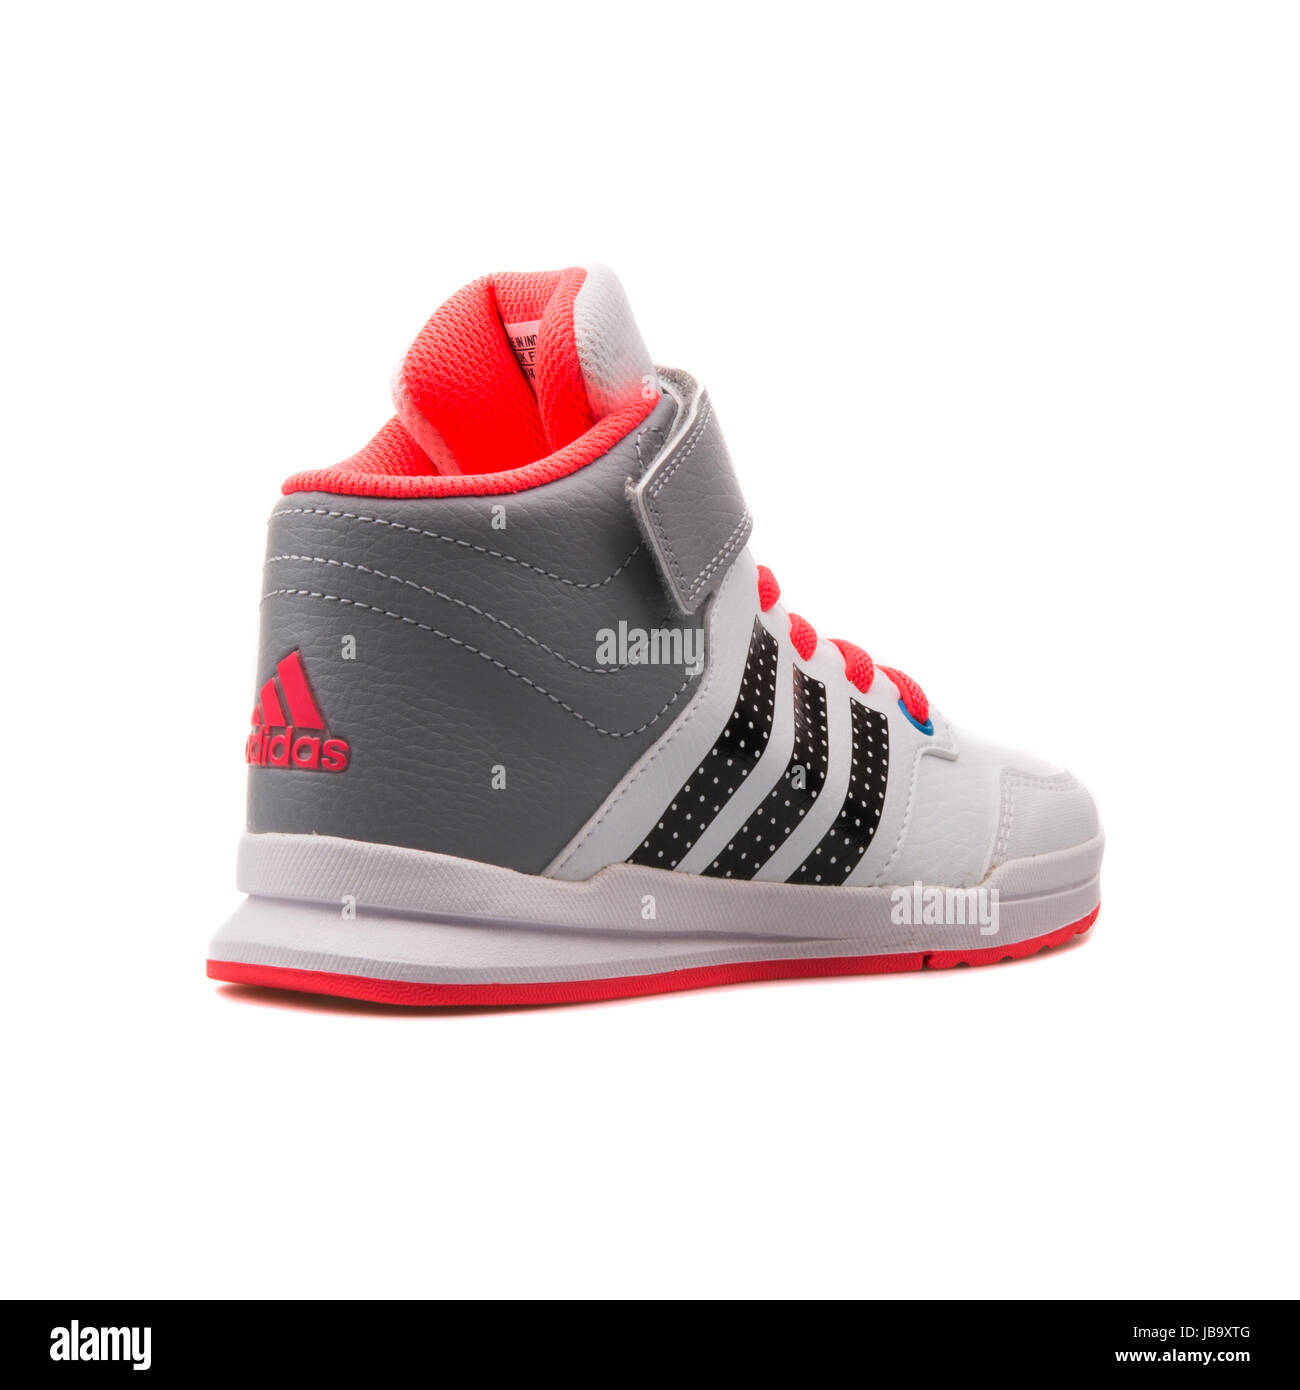 Adidas Jan BS 2 Mid C White, Grey and Red Kids Sports Shoes - B23905 Stock  Photo - Alamy